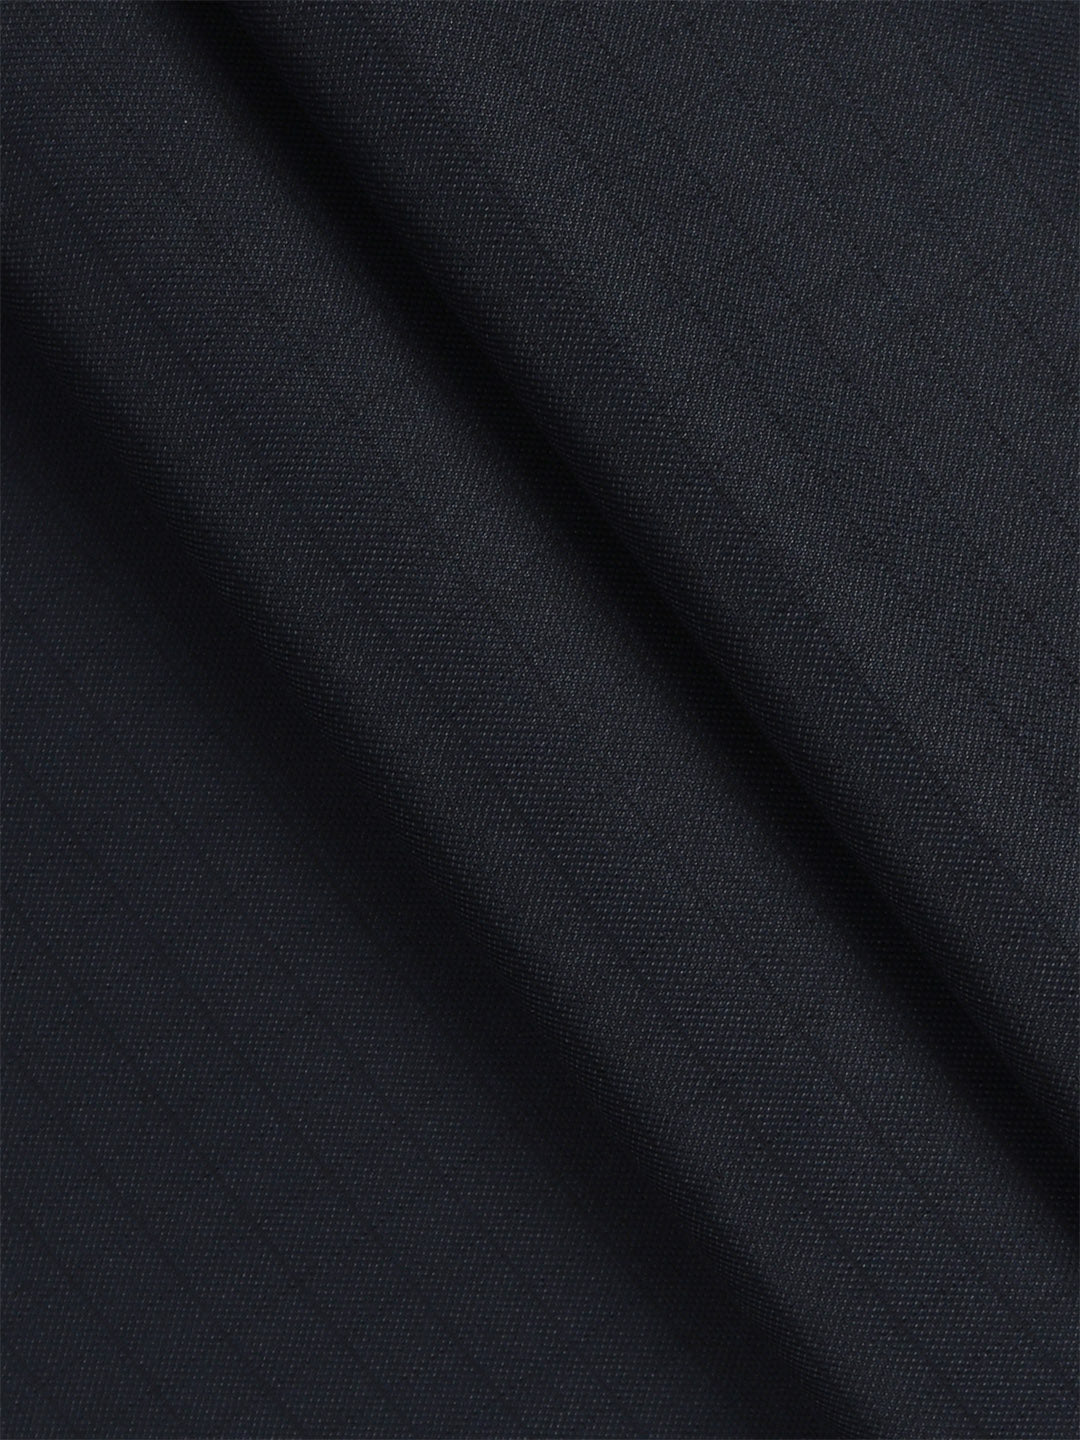 Cotton Blended Navy Colour Striped Pants Fabric Miracle